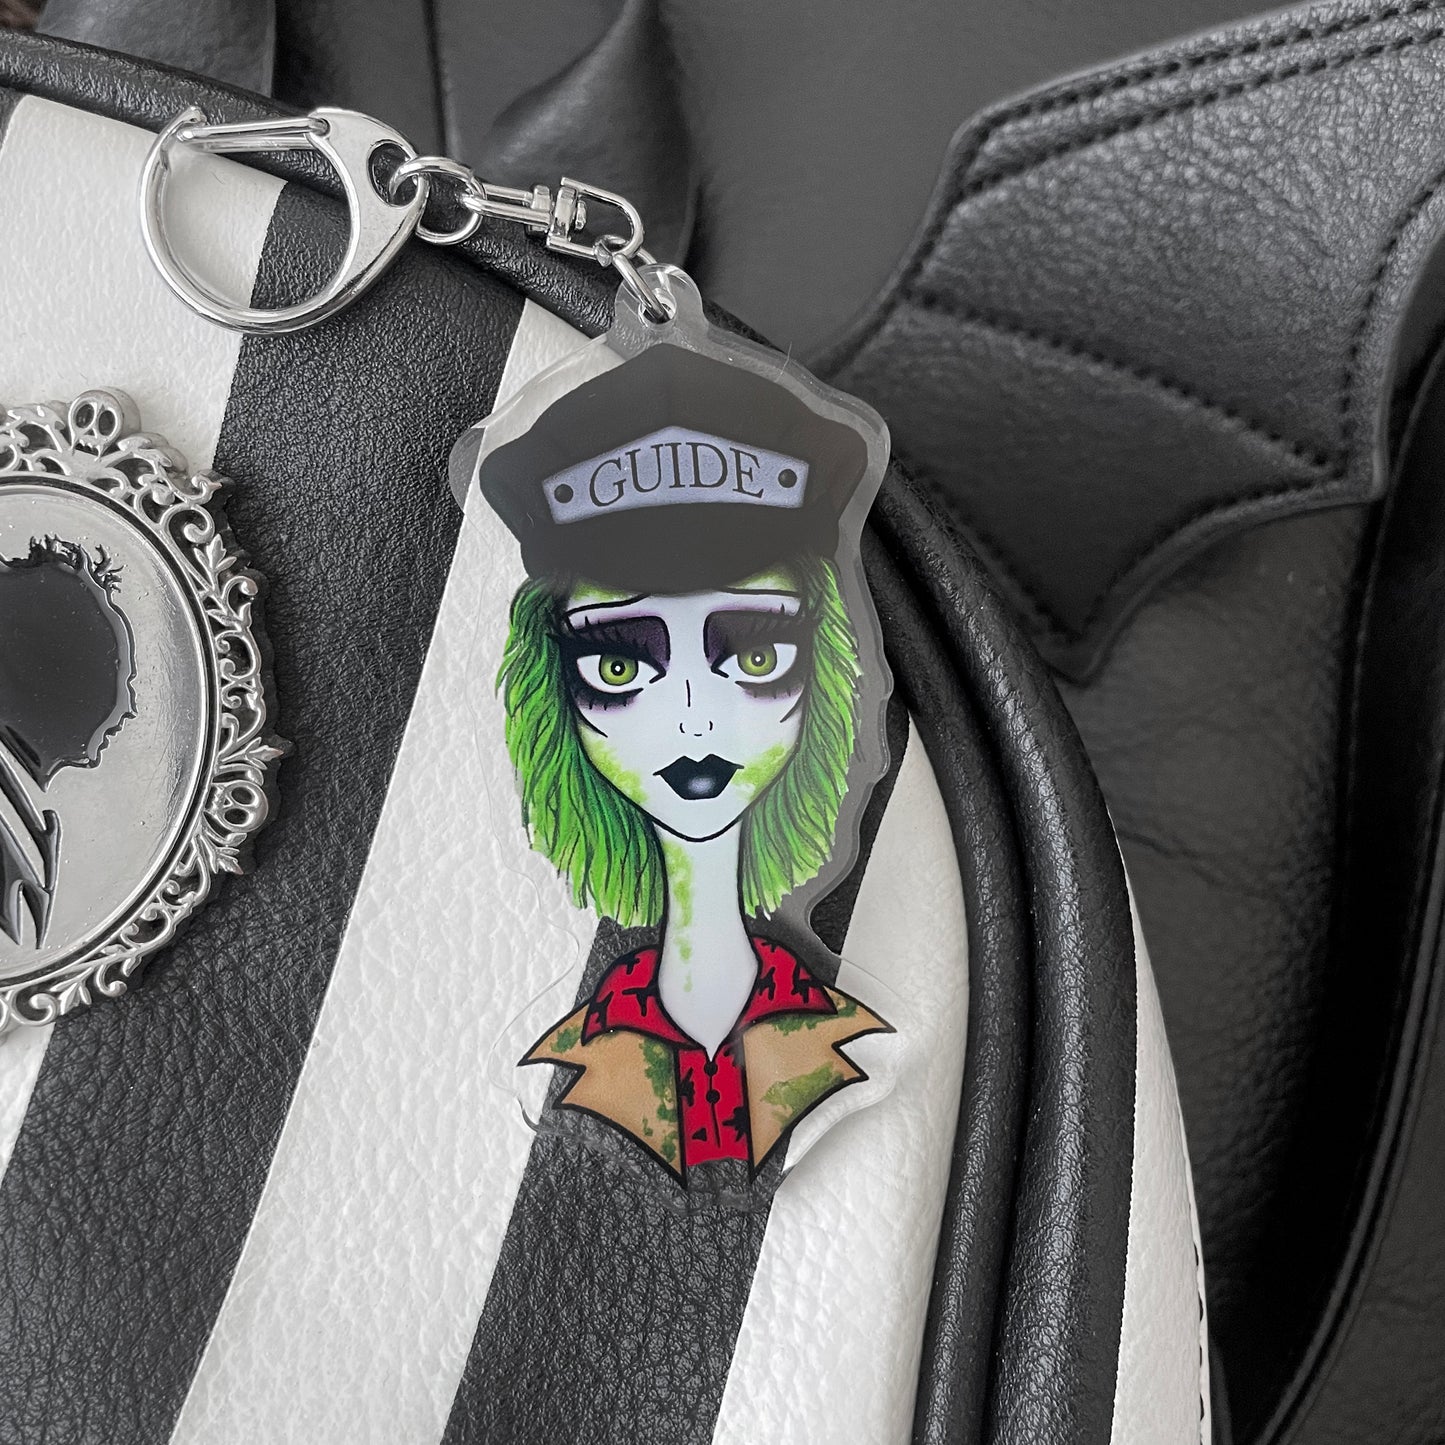 NEW! Spooky Girl Key Chains